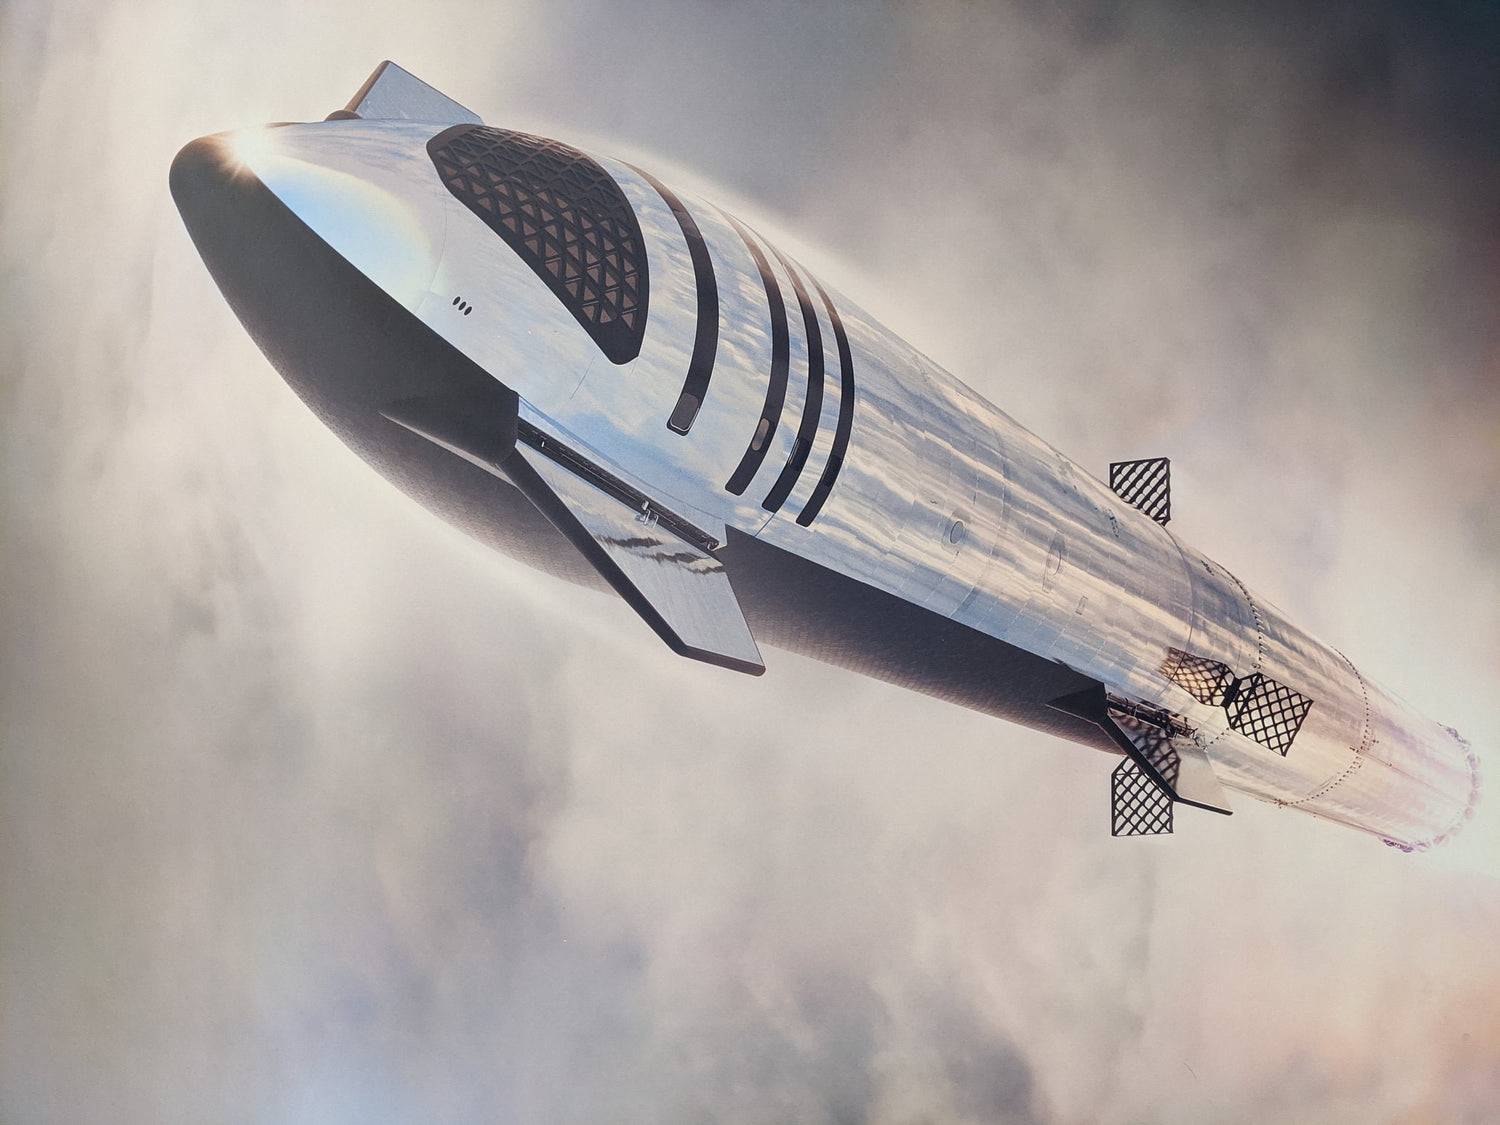 SpaceX Plans To Conduct At Least A Dozen Starship Launches In 2022, Targets First Orbital Flight Test As Soon As January